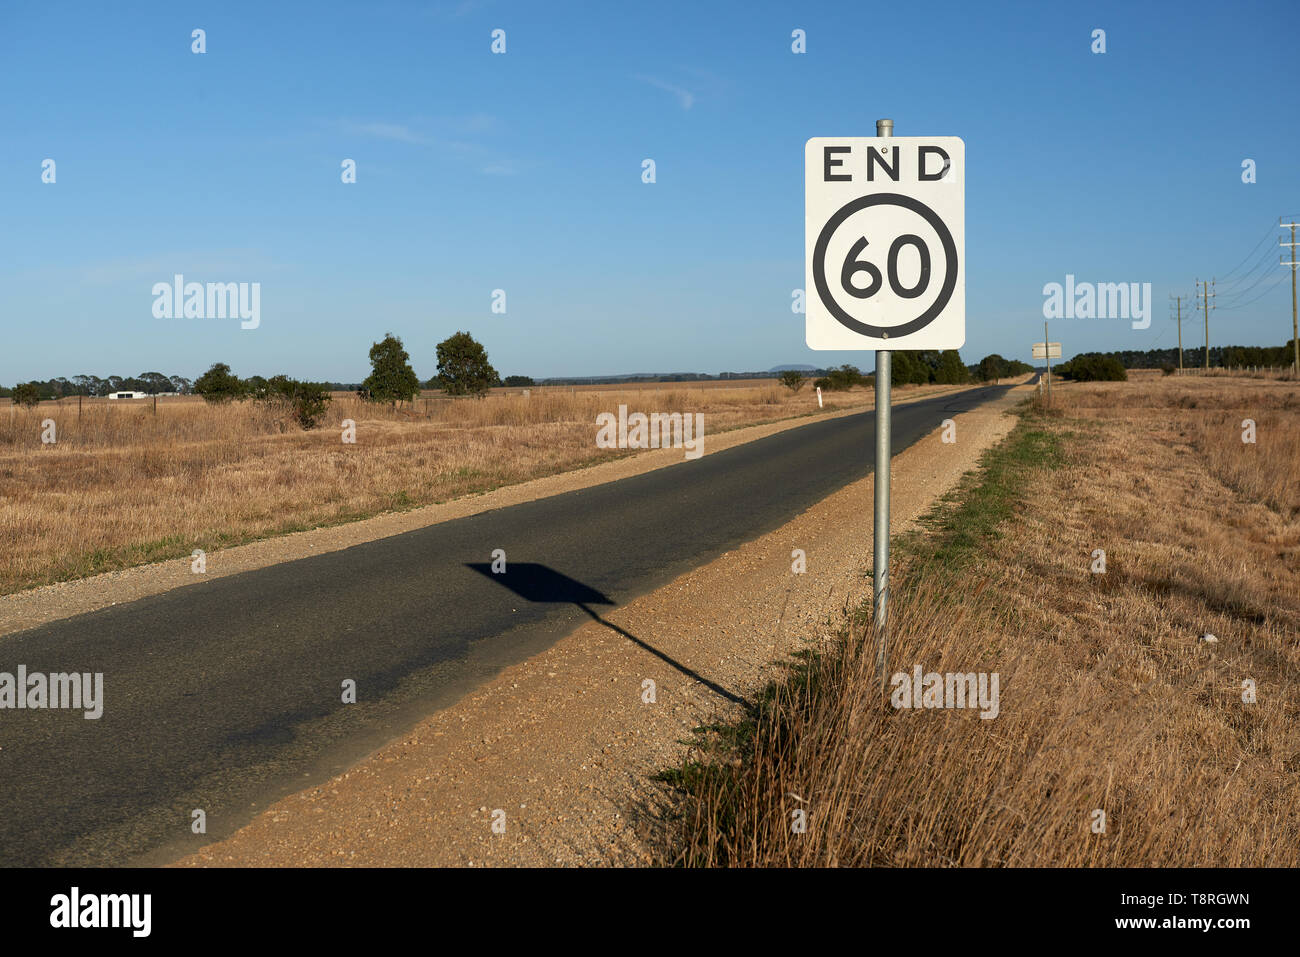 End of speed restriction road sign on a narrow Australian country road signifying an end to a 60 kilometre per hour safety speed limit area. Stock Photo